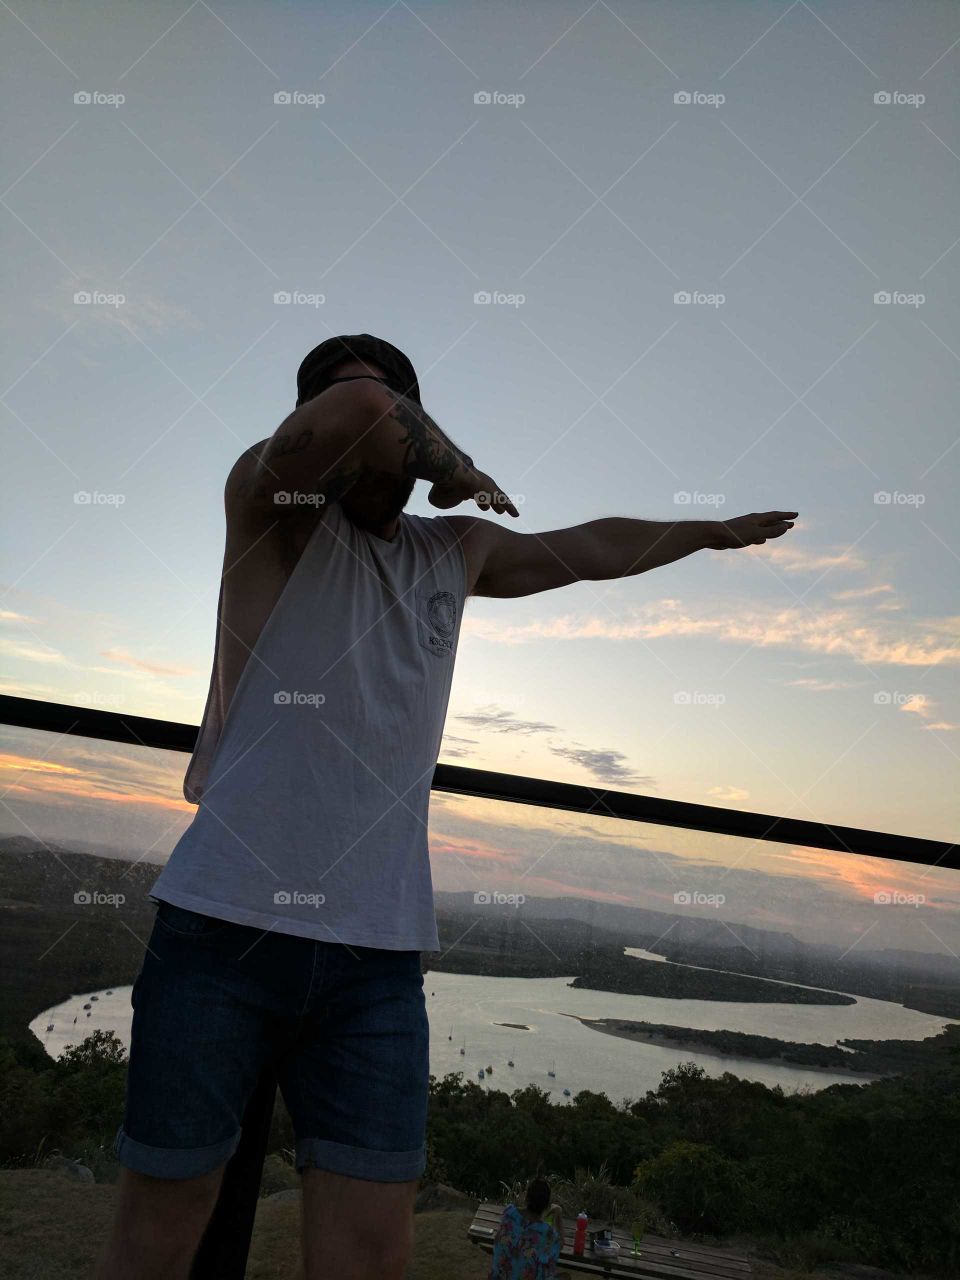 Dab on the grassy hill in Cooktown, Australia